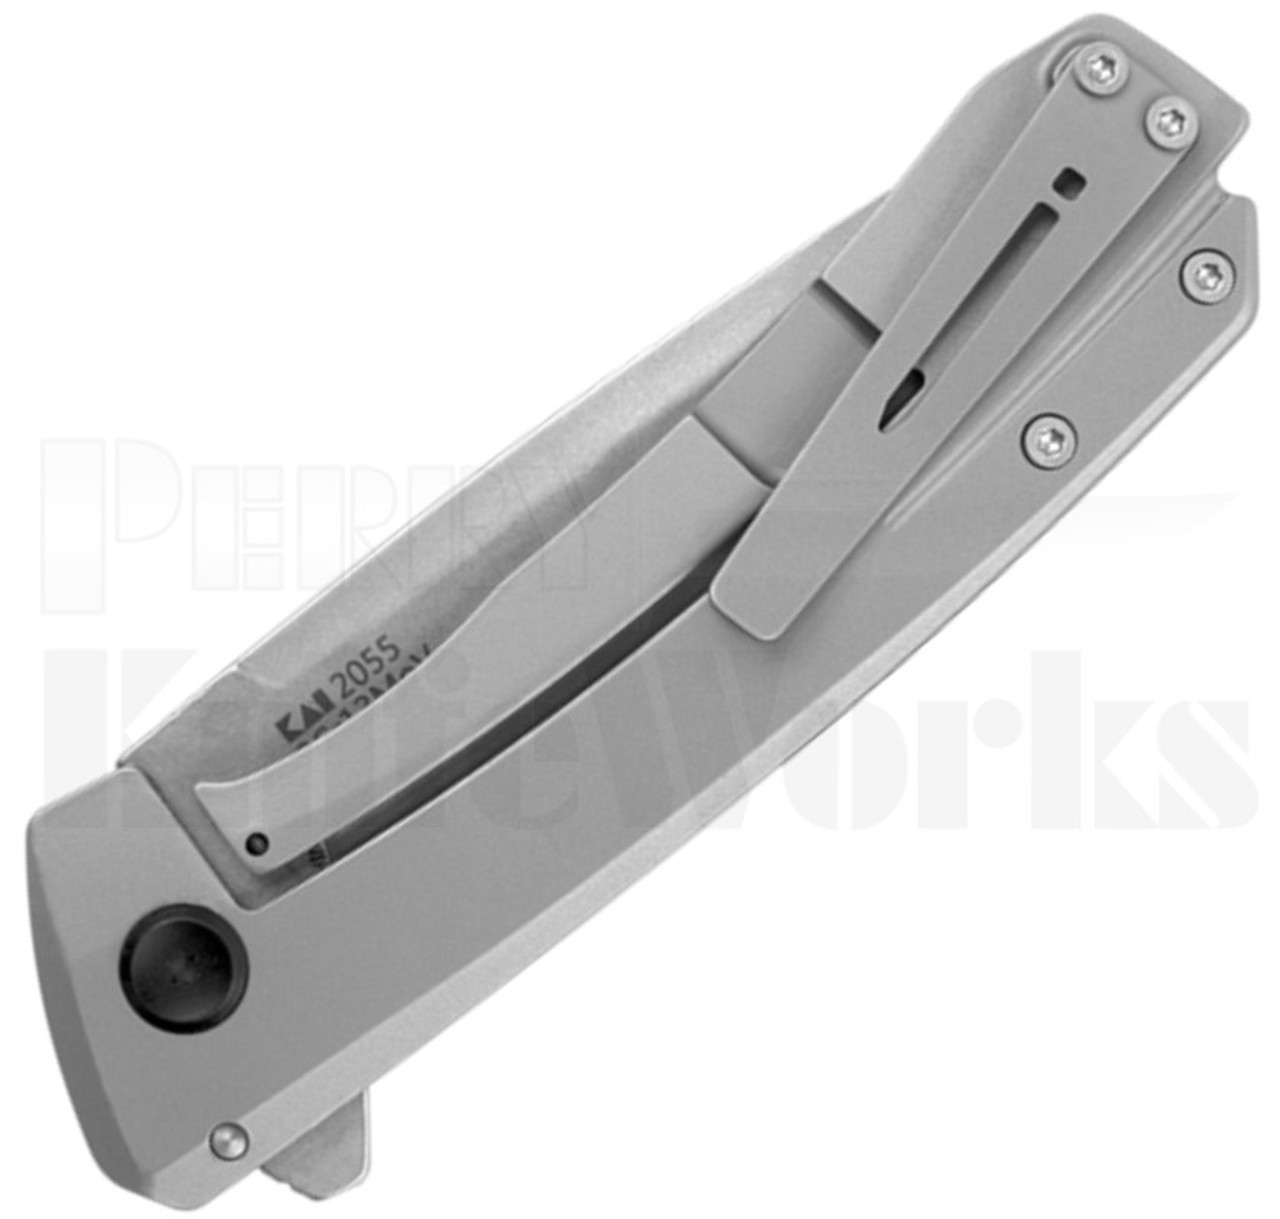 Kershaw Comeback Framelock Knife Stainless Steel 2055 l For Sale